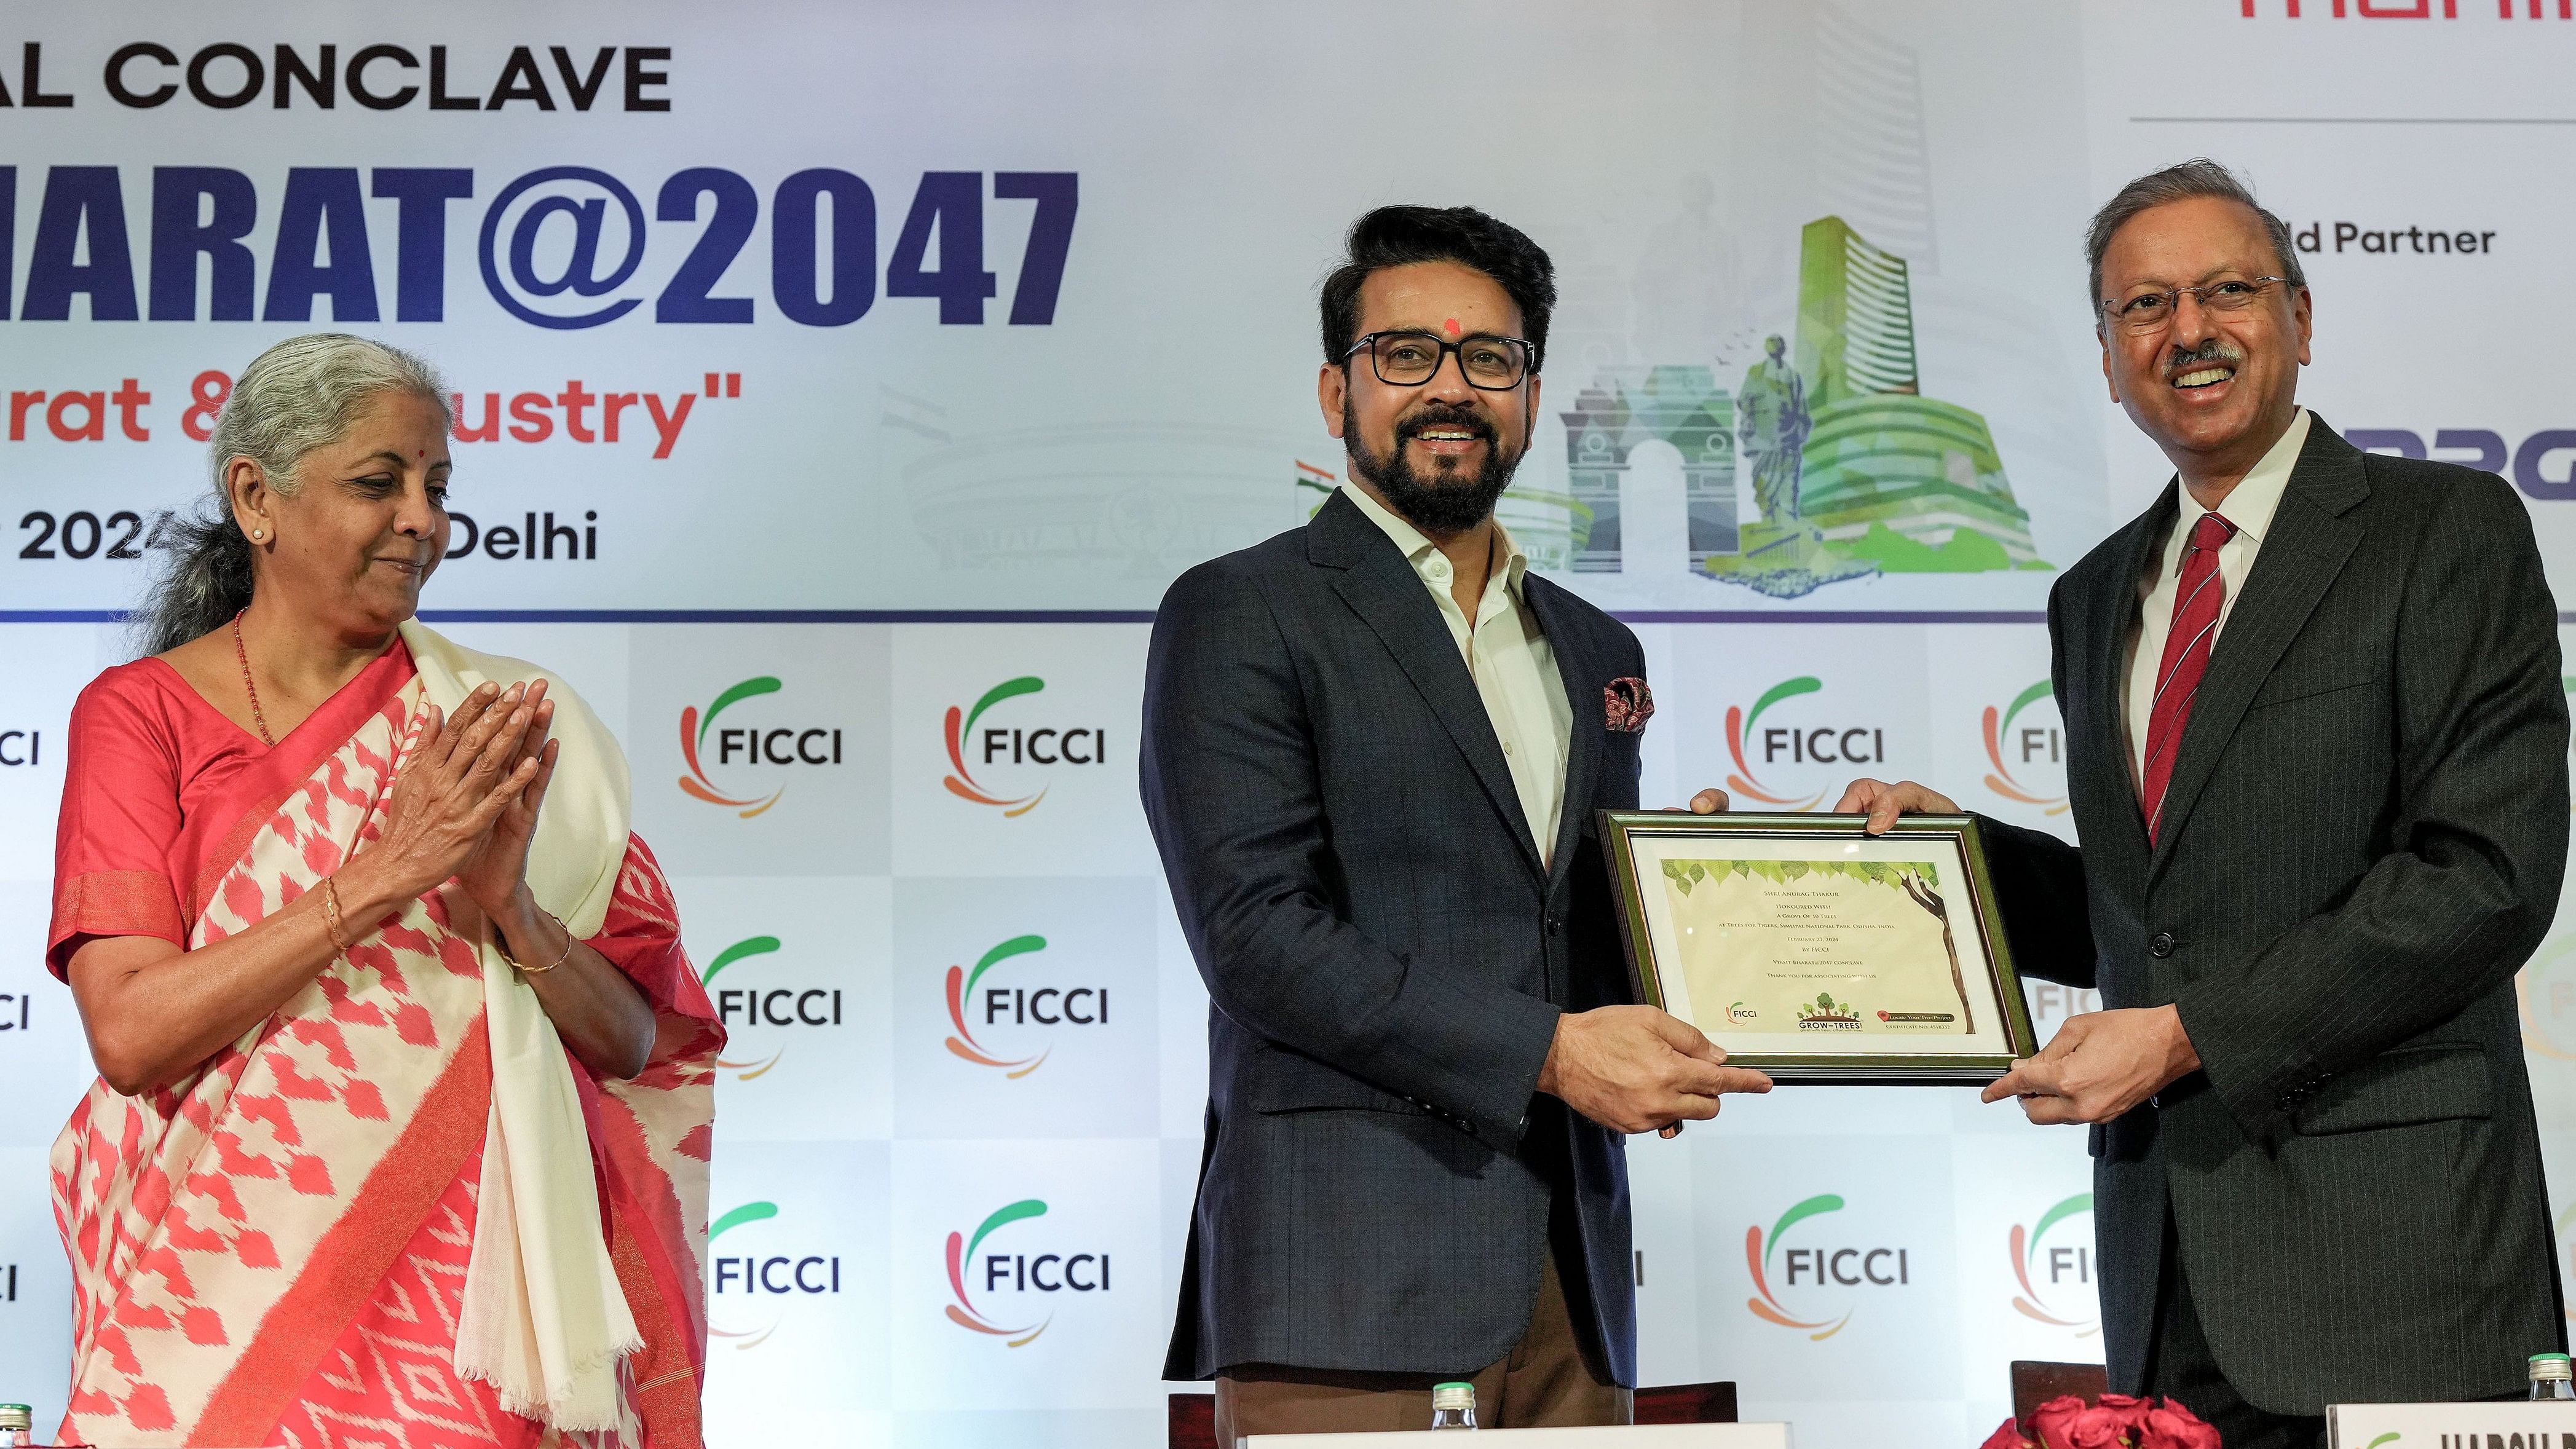 <div class="paragraphs"><p> Union I &amp; B Minister Anurag Thakur being presented a green certificate by FICCI Past President Harsh Pati Singhania as Union Finance Minister Nirmala Sitharaman claps, during the 'Viksit Bharat@2047' national conclave, in New Delhi</p></div>